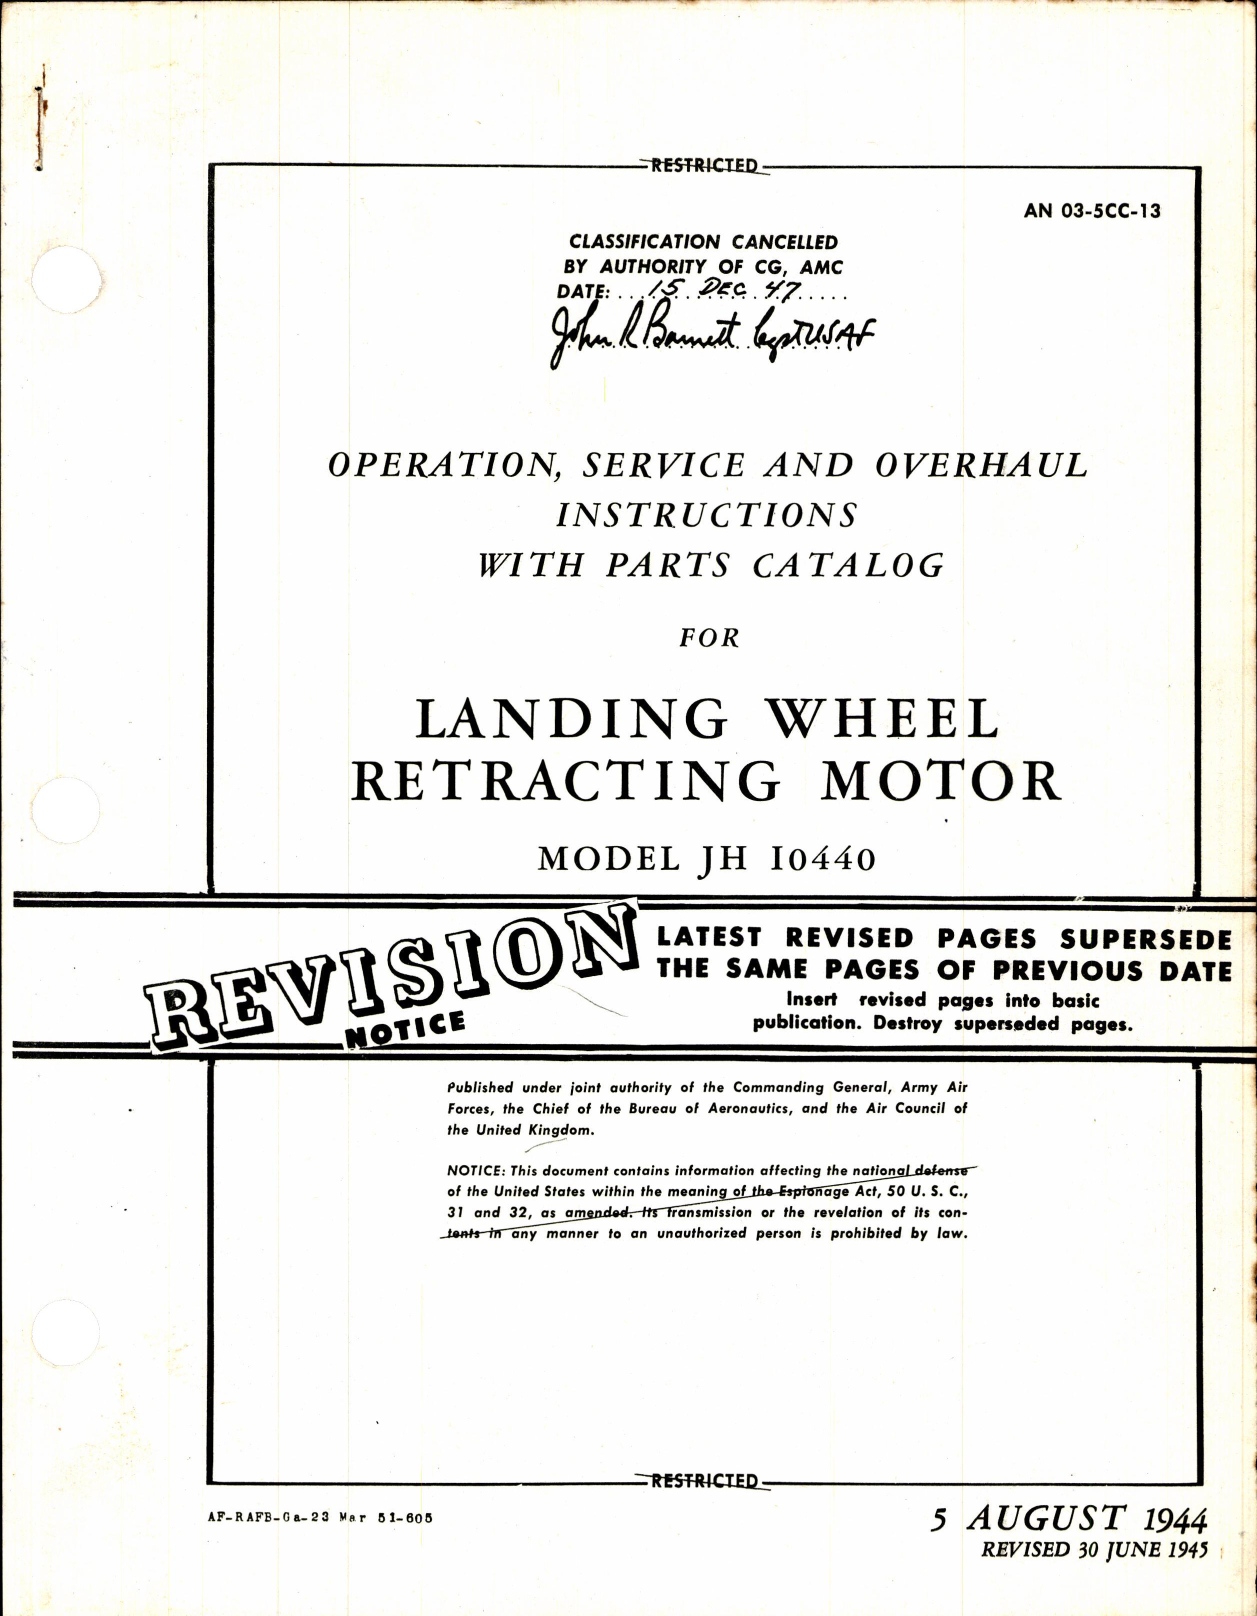 Sample page 1 from AirCorps Library document: Operation, Service, and Overhaul Instructions with Parts Catalog for Landing Wheel Retracting Motor Model JH I0440